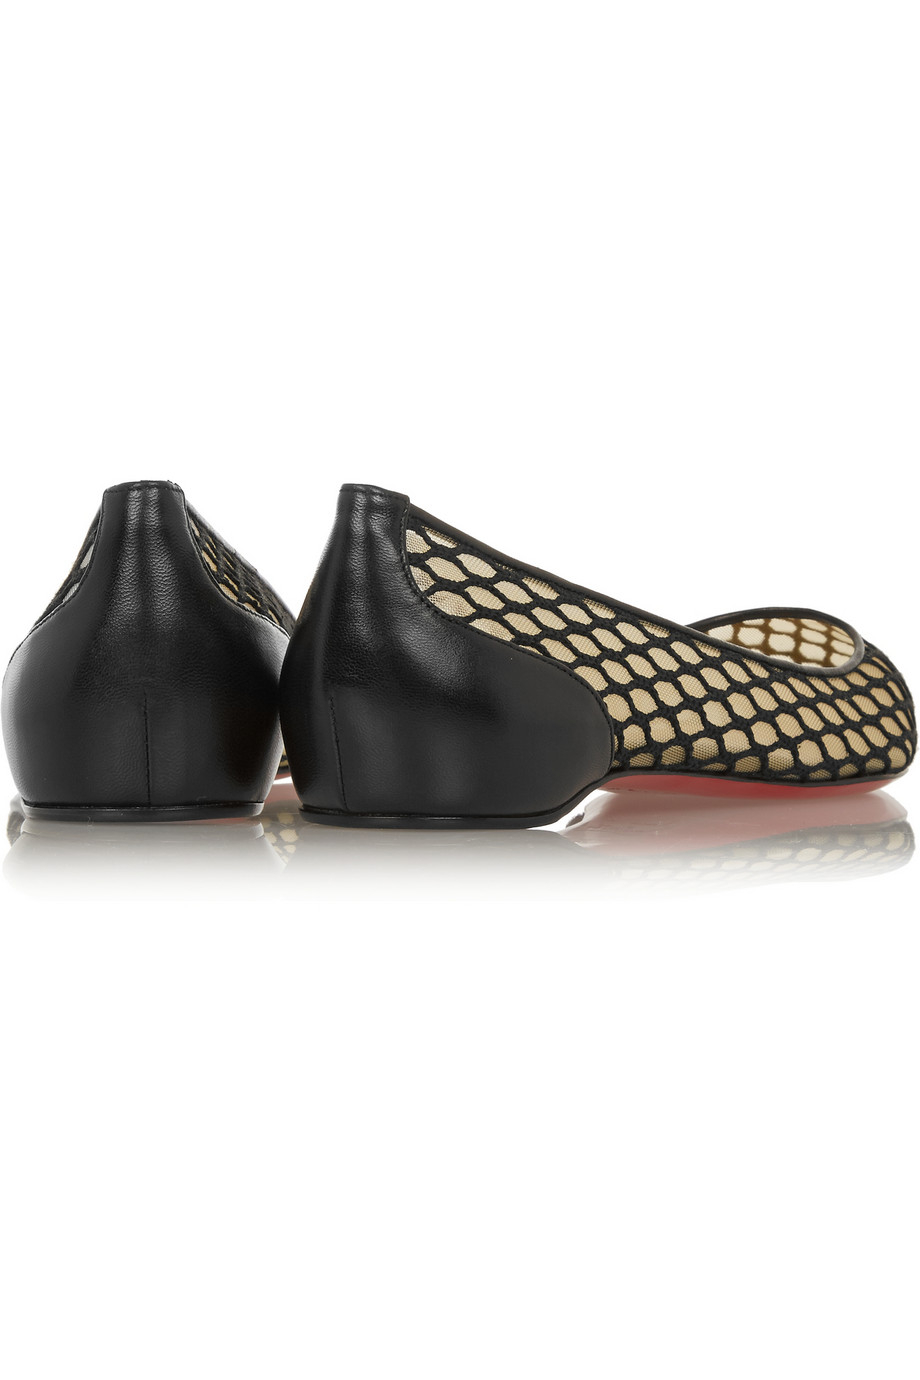 red spiked shoes - Artesur ? christian louboutin pointed-toe pumps Black mesh leather ...